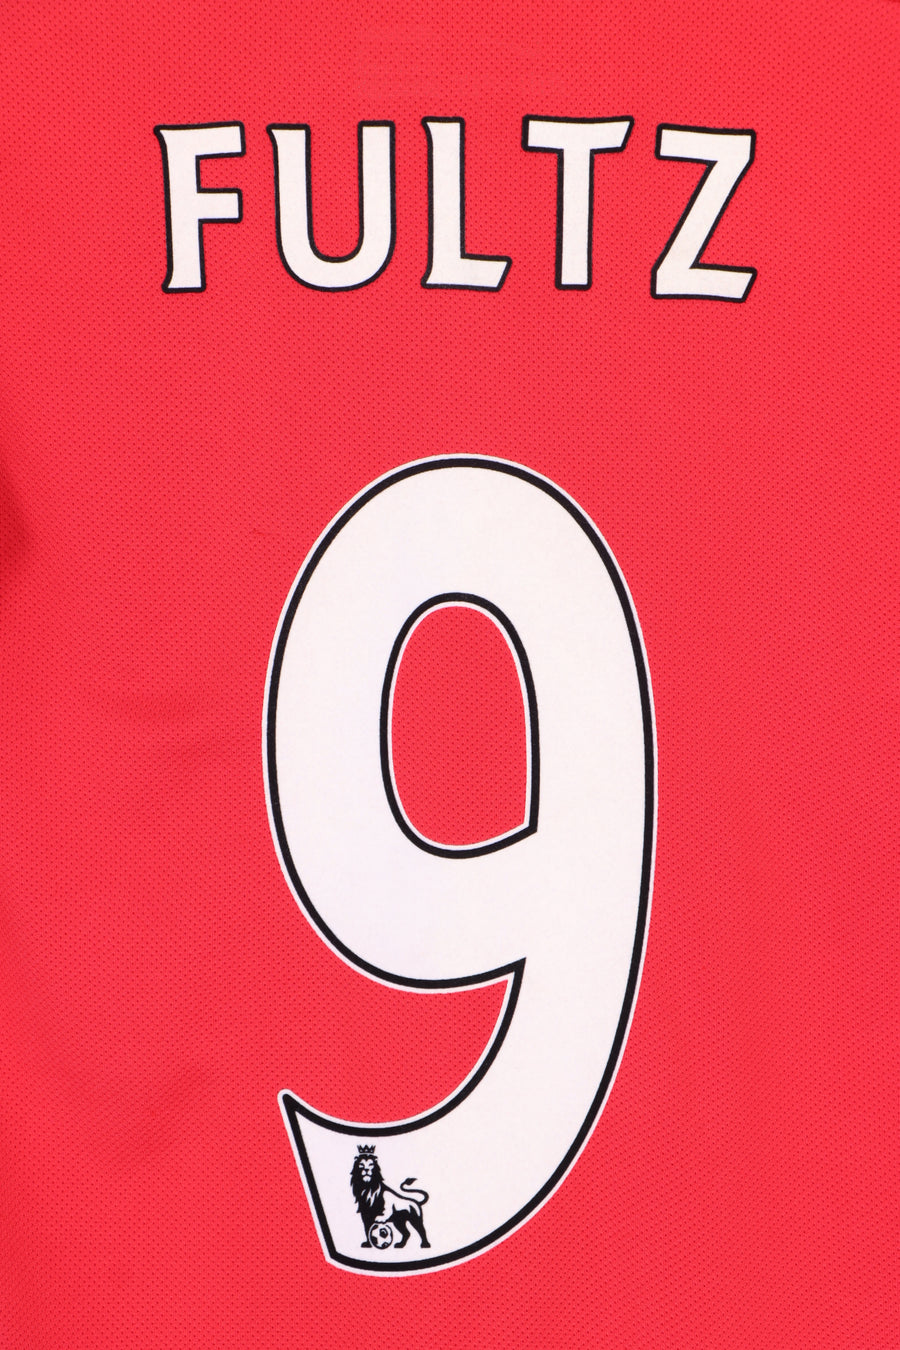 Manchester United 2011/2012 "Fultz" #9 NIKE Home Soccer Jersey (S)